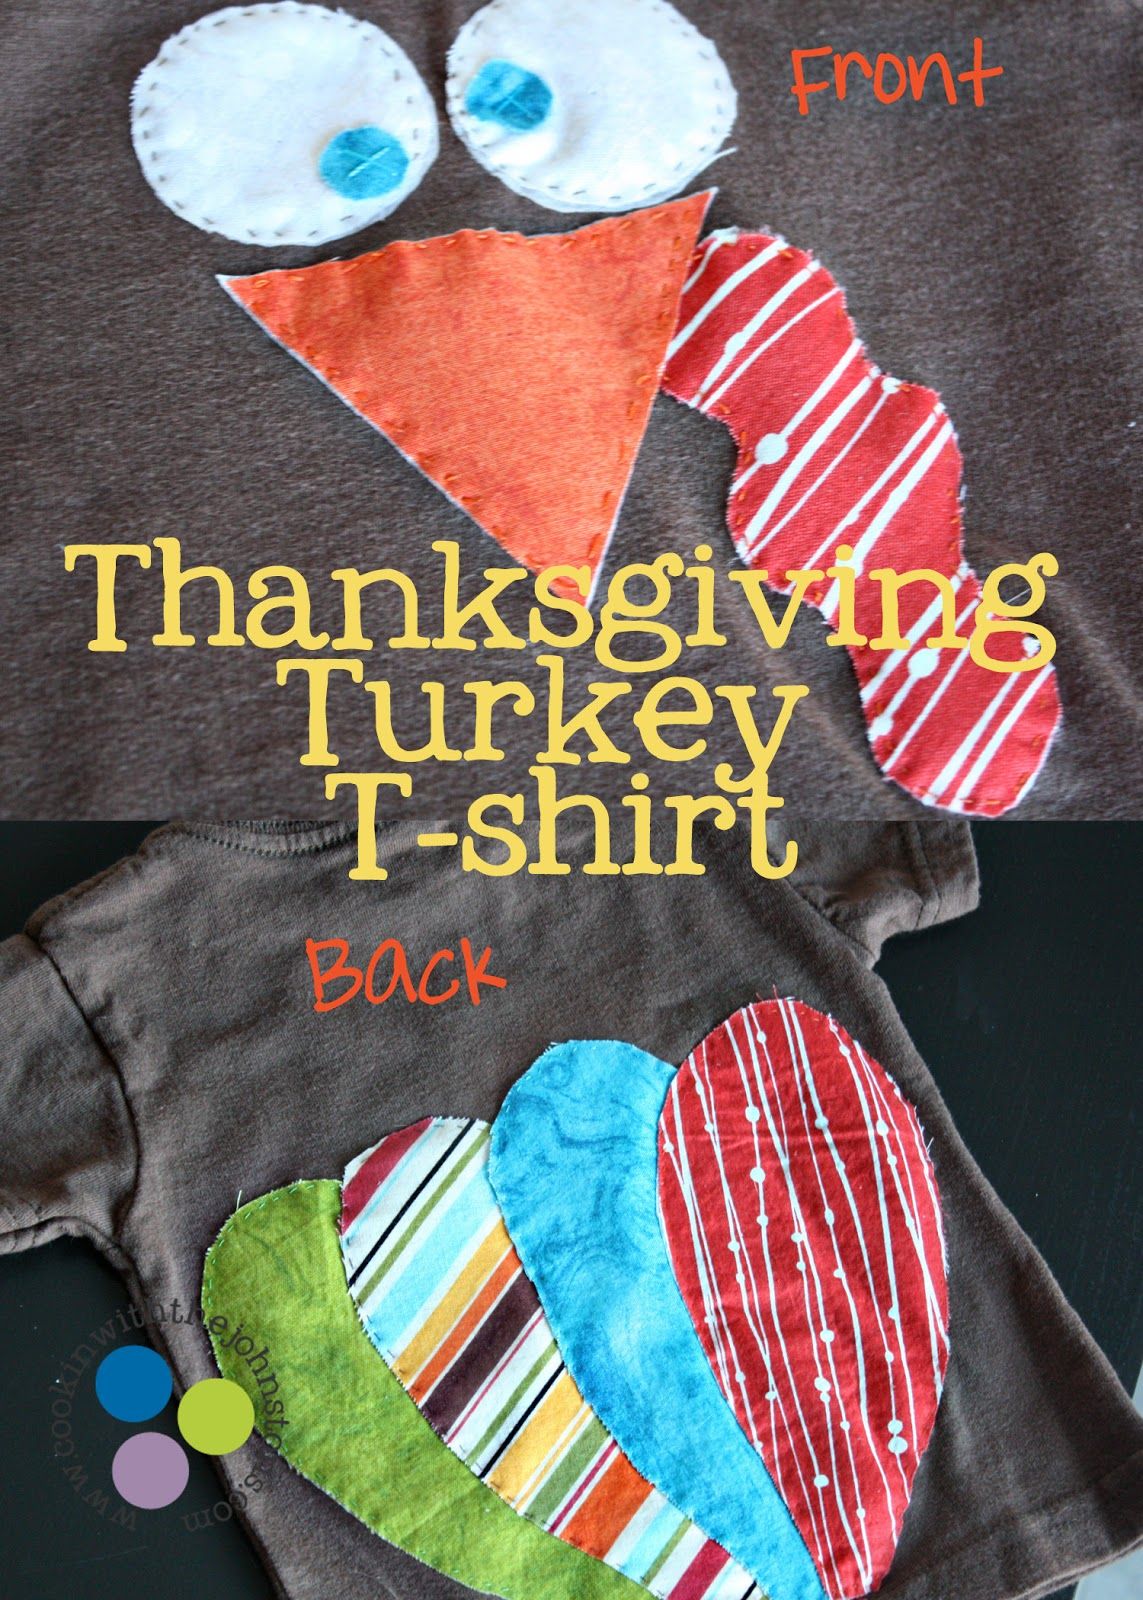 Turkey T-shirt….I know a couple of turkeys who need one of these!